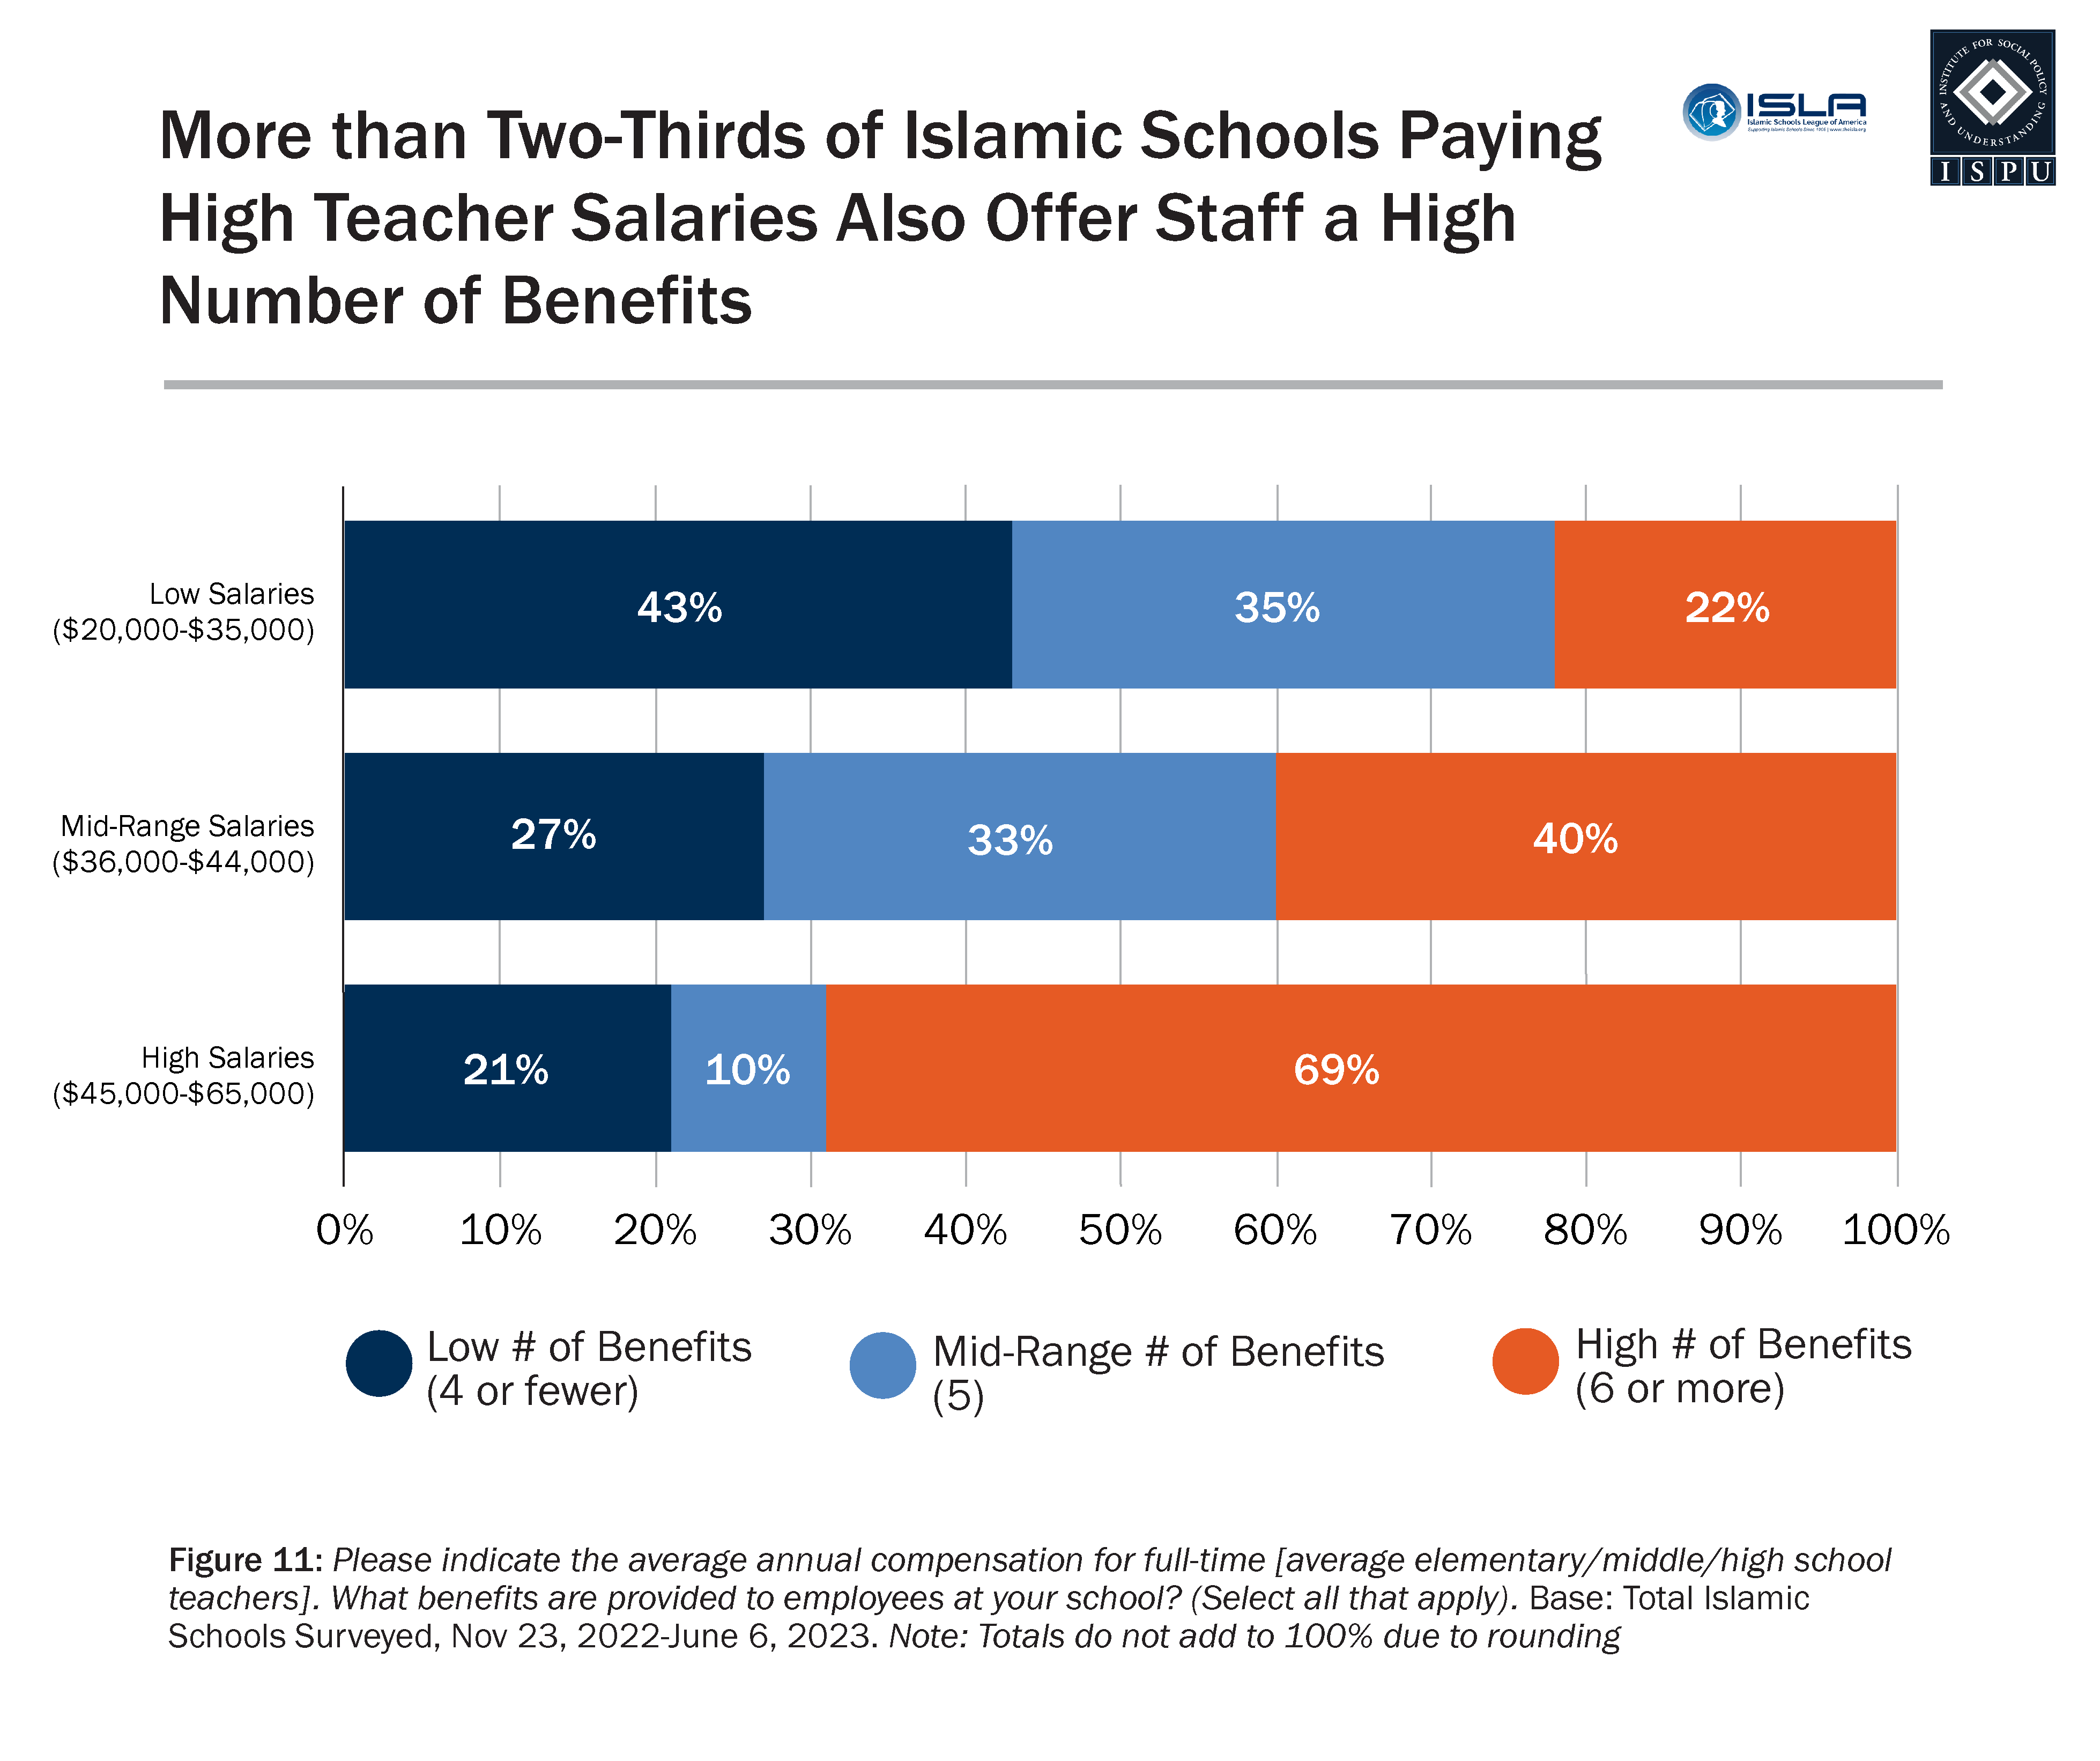 A horizontal stacked bar graph showing the percentage of schools offering a low number of benefits, a mid-range number of benefits, and a high number of benefits by overall teacher salary level (low, mid-range, high).